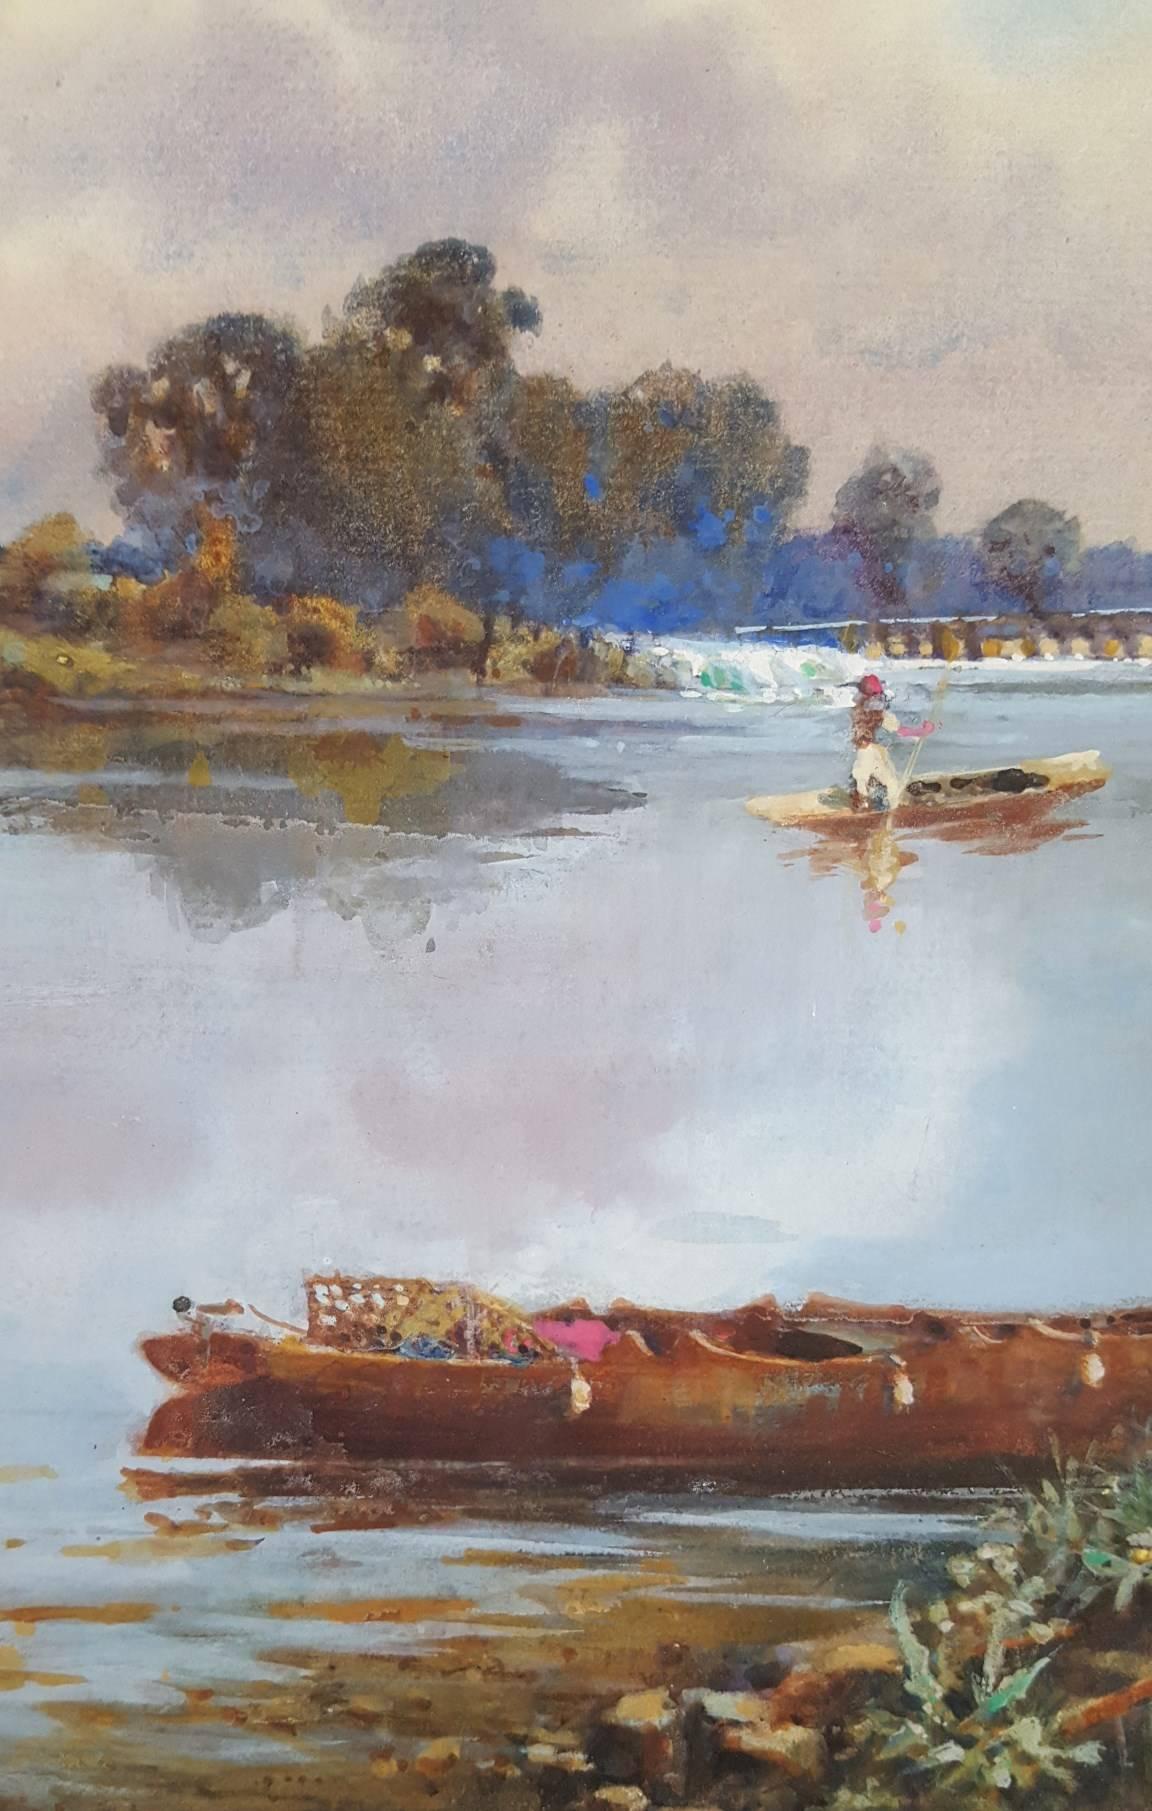 On the Thames  - Impressionist Art by F. Denner Smith